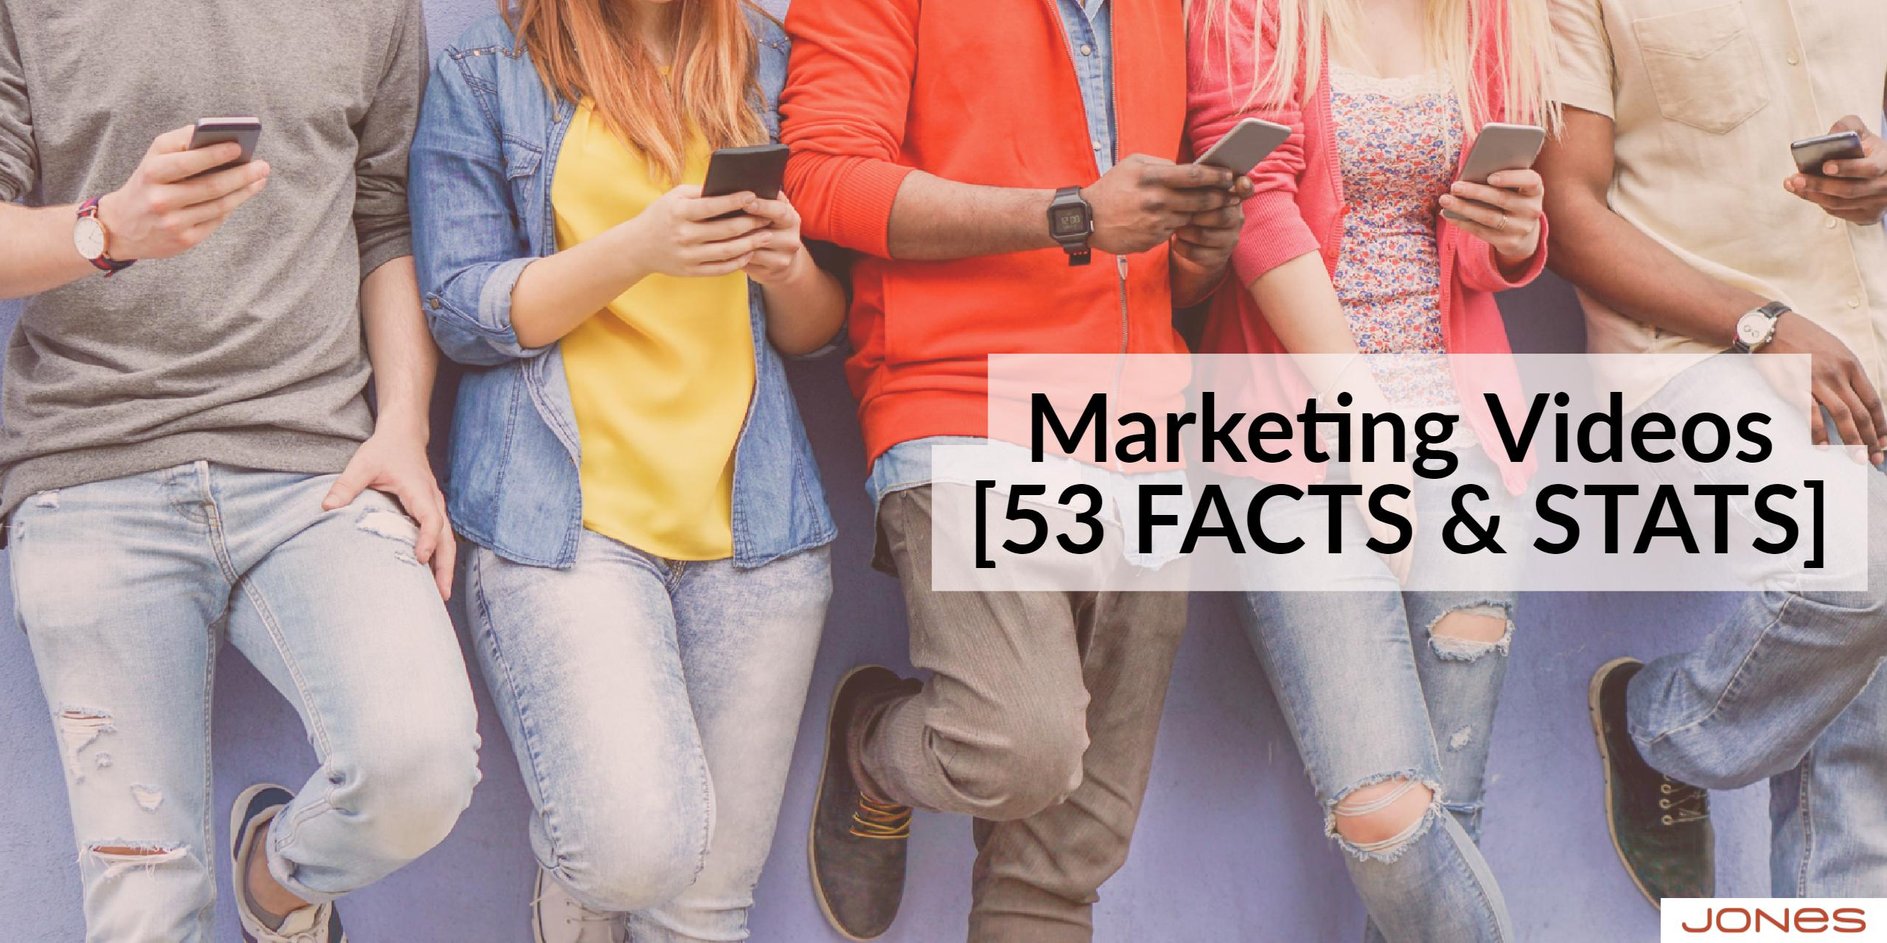 53 Facts and Stats About Marketing Videos